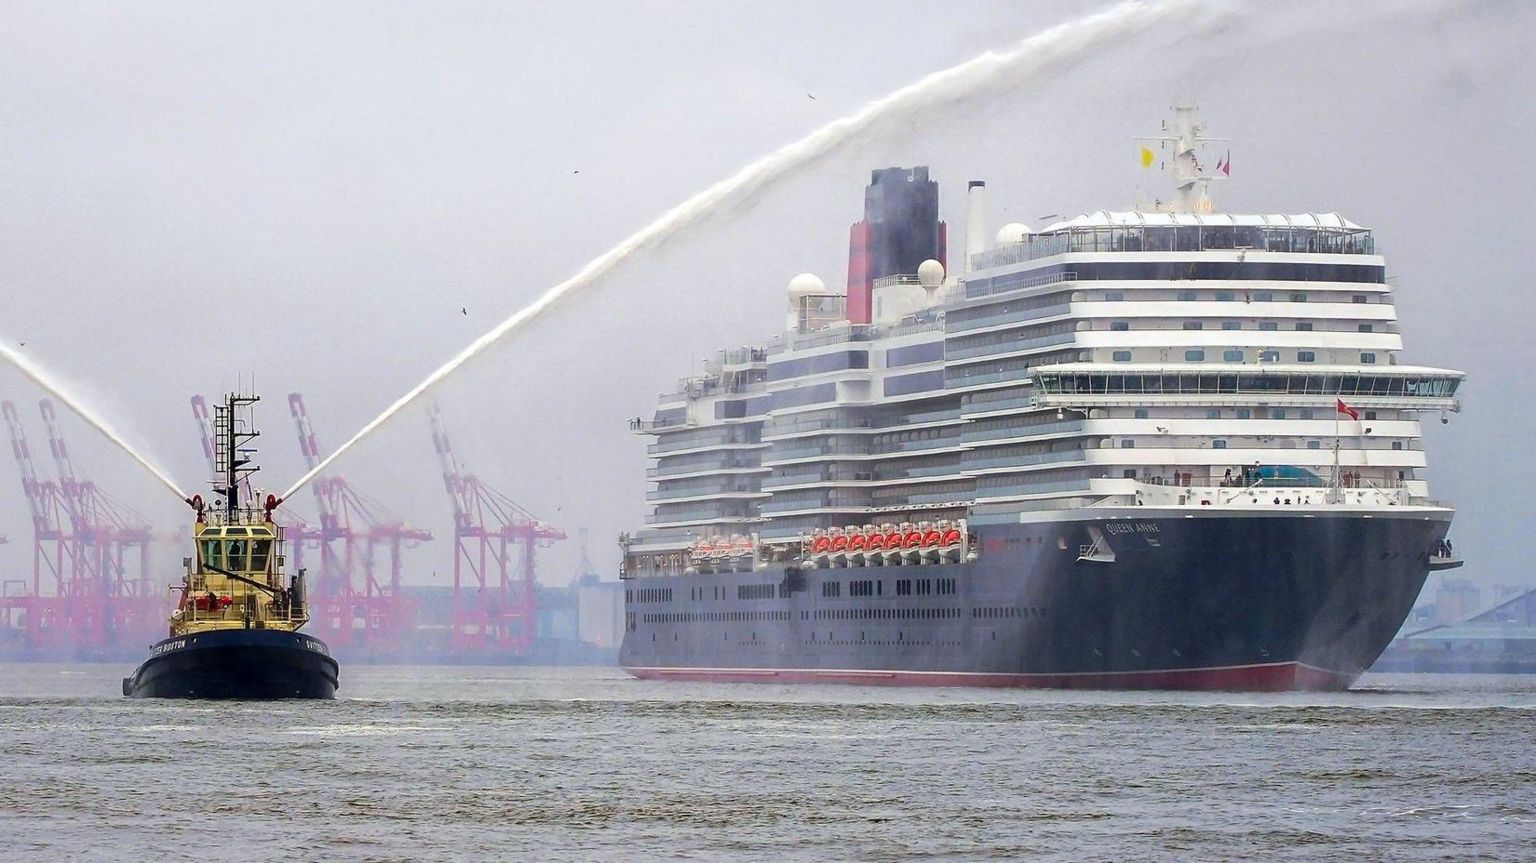 Cunard cruise ship the Queen Anne is escorted by a tug boat on the River Mersey